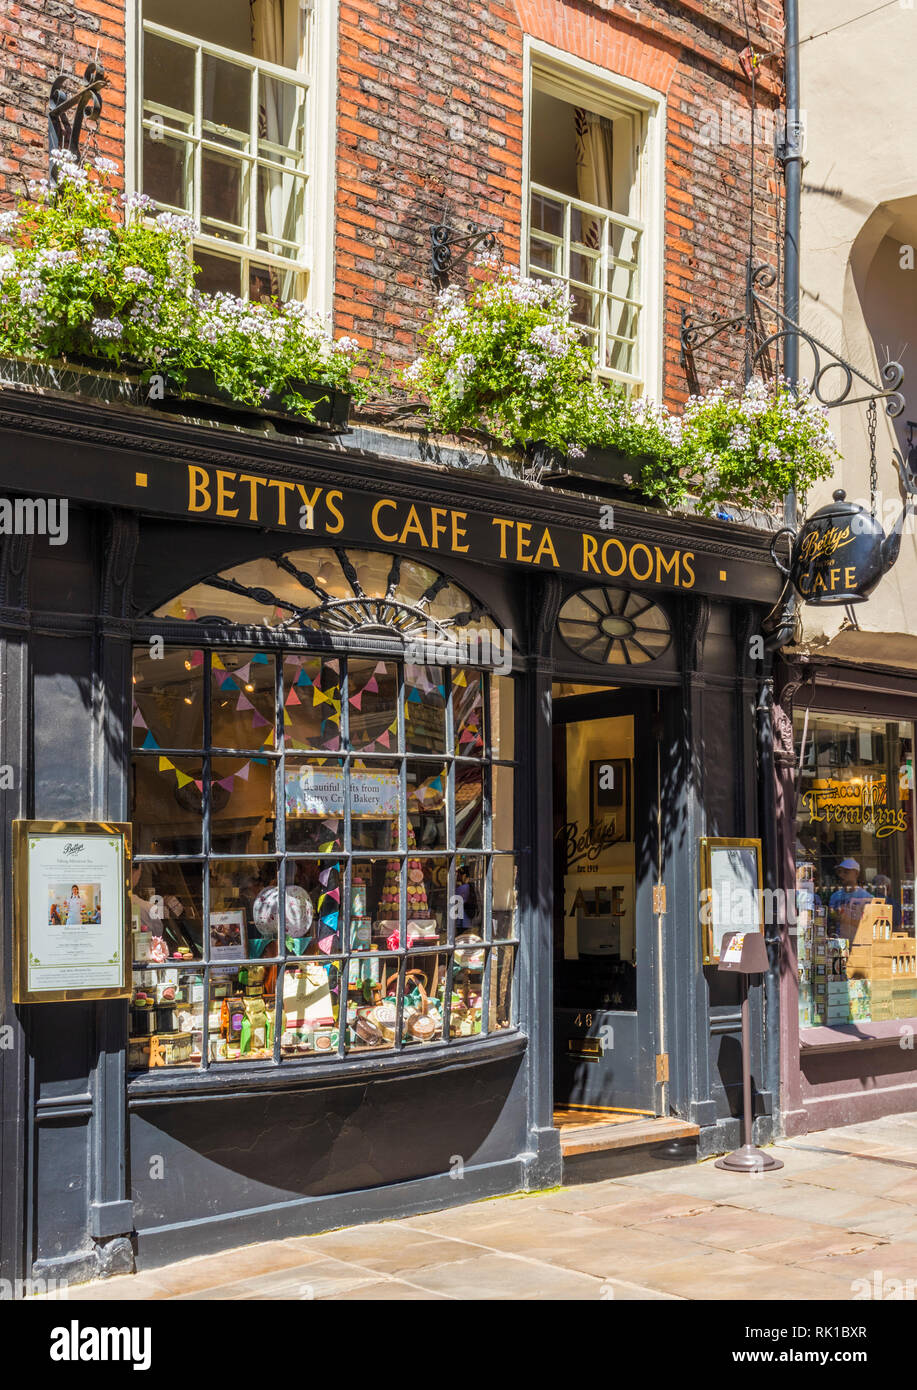 famous Bettys cafe and tea rooms on Stonegate city of York Yorkshire York Yorkshire England gb uk Europe0 Stock Photo